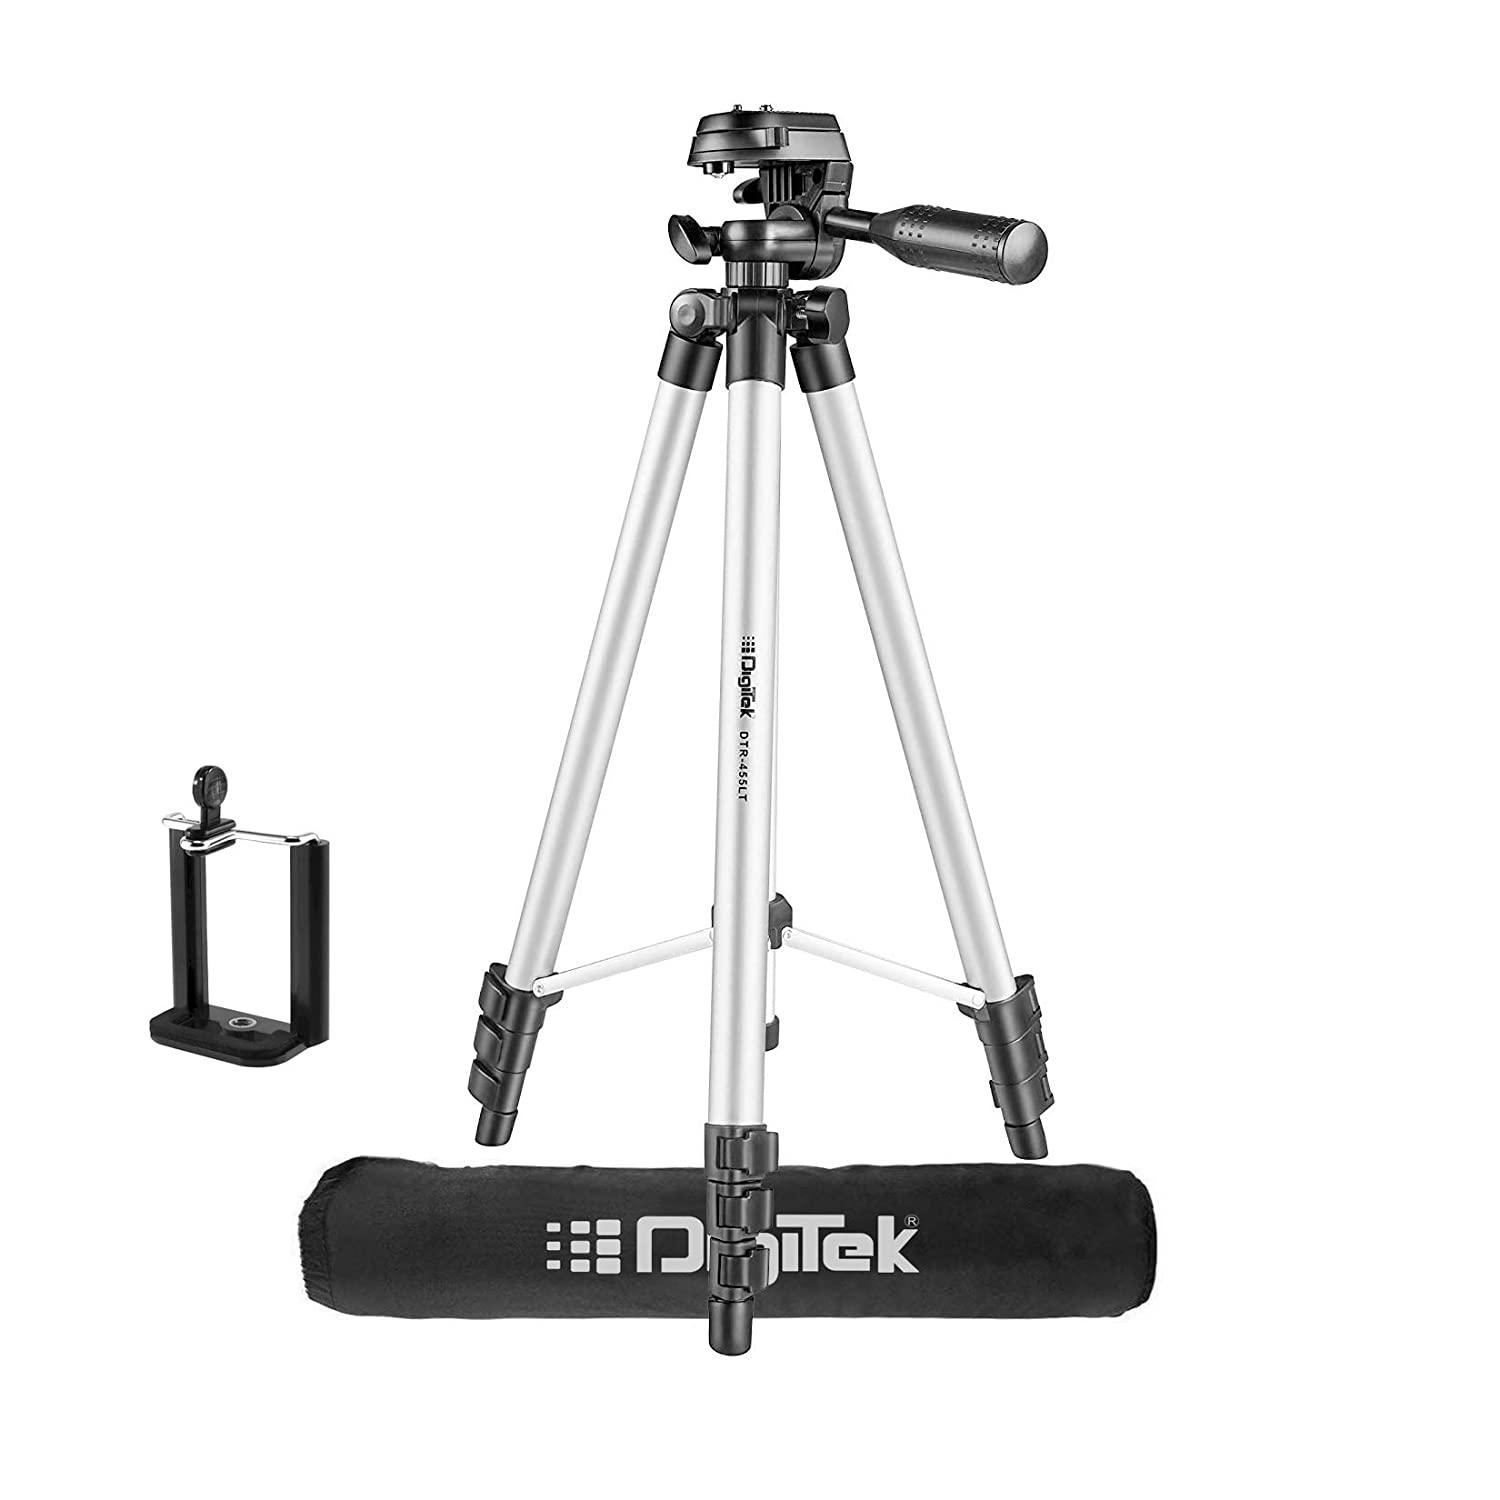 Digitek (DTR 455 LT) (51 Inch) Tripod for Smartphones & Cameras with Mobile Holder and Carry Bag, Max Operating Height - 4.26 Feet, Load Capacity-3 Kg, Lightweight & Sturdy Tripod with Adjustable 3 Way Pan Head - Digitek